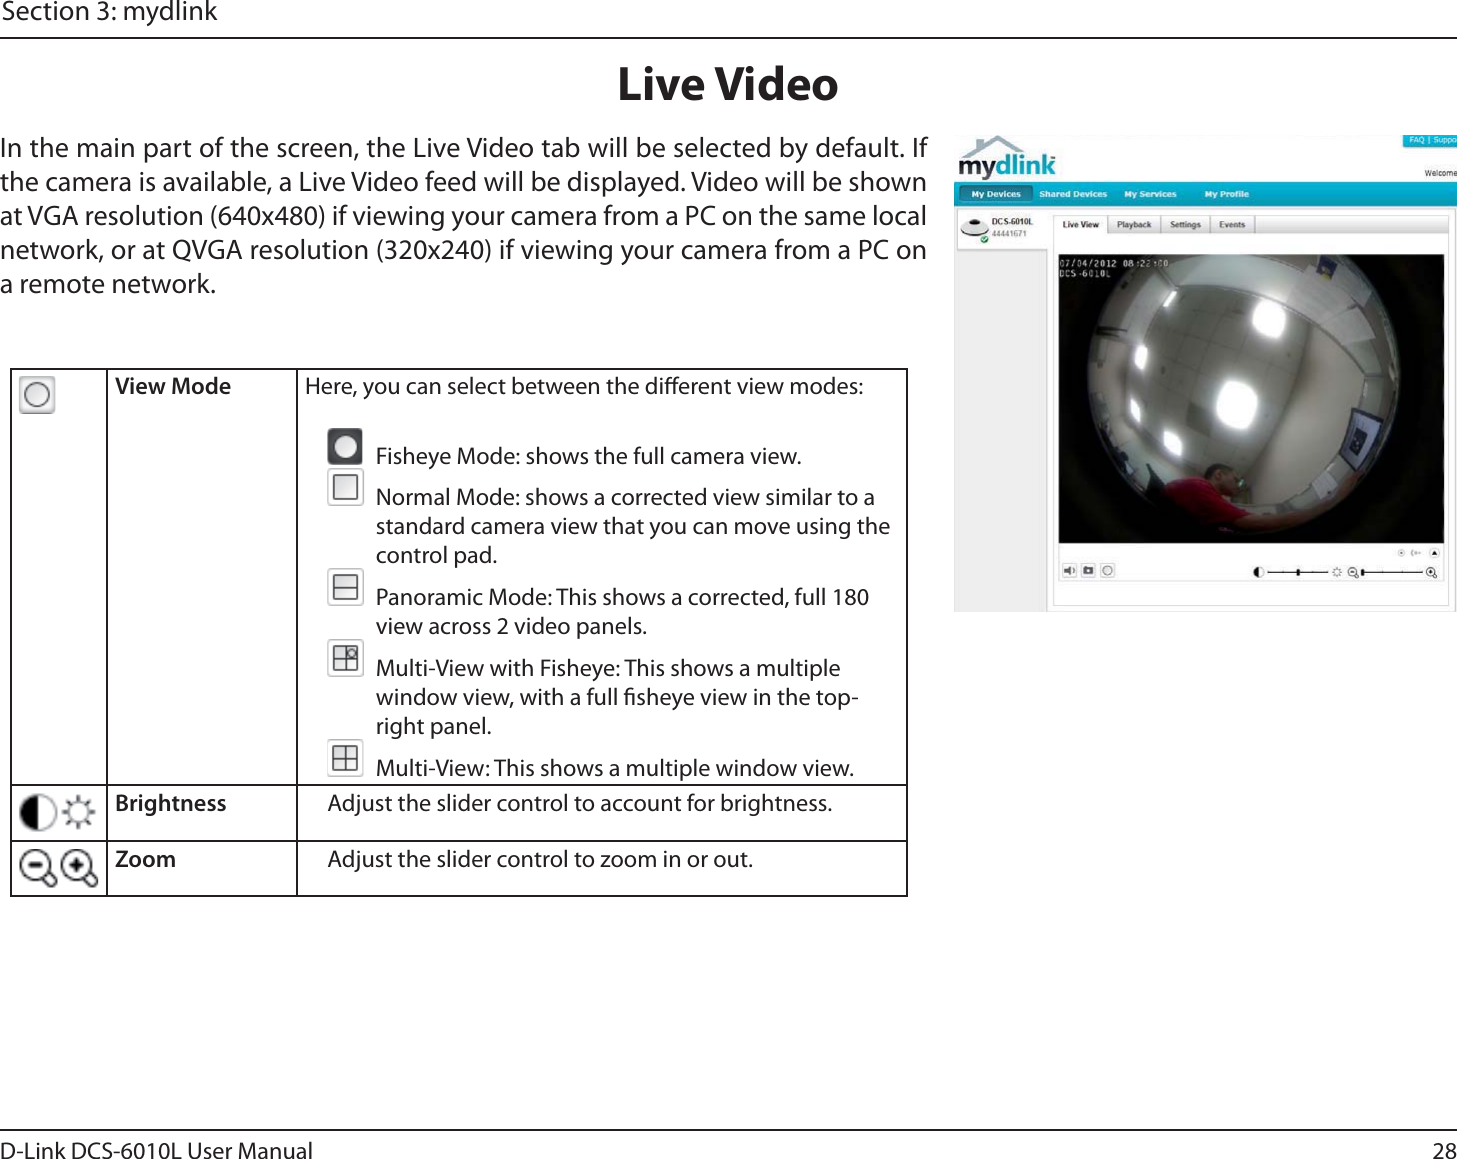 28D-Link DCS-6010L User ManualSection 3: mydlinkLive VideoIn the main part of the screen, the Live Video tab will be selected by default. If the camera is available, a Live Video feed will be displayed. Video will be shown at VGA resolution (640x480) if viewing your camera from a PC on the same local network, or at QVGA resolution (320x240) if viewing your camera from a PC on a remote network.View Mode Here, you can select between the dierent view modes:  Fisheye Mode: shows the full camera view.  Normal Mode: shows a corrected view similar to a standard camera view that you can move using the control pad.  Panoramic Mode: This shows a corrected, full 180 view across 2 video panels.  Multi-View with Fisheye: This shows a multiple window view, with a full sheye view in the top-right panel.  Multi-View: This shows a multiple window view.Brightness Adjust the slider control to account for brightness.Zoom Adjust the slider control to zoom in or out.